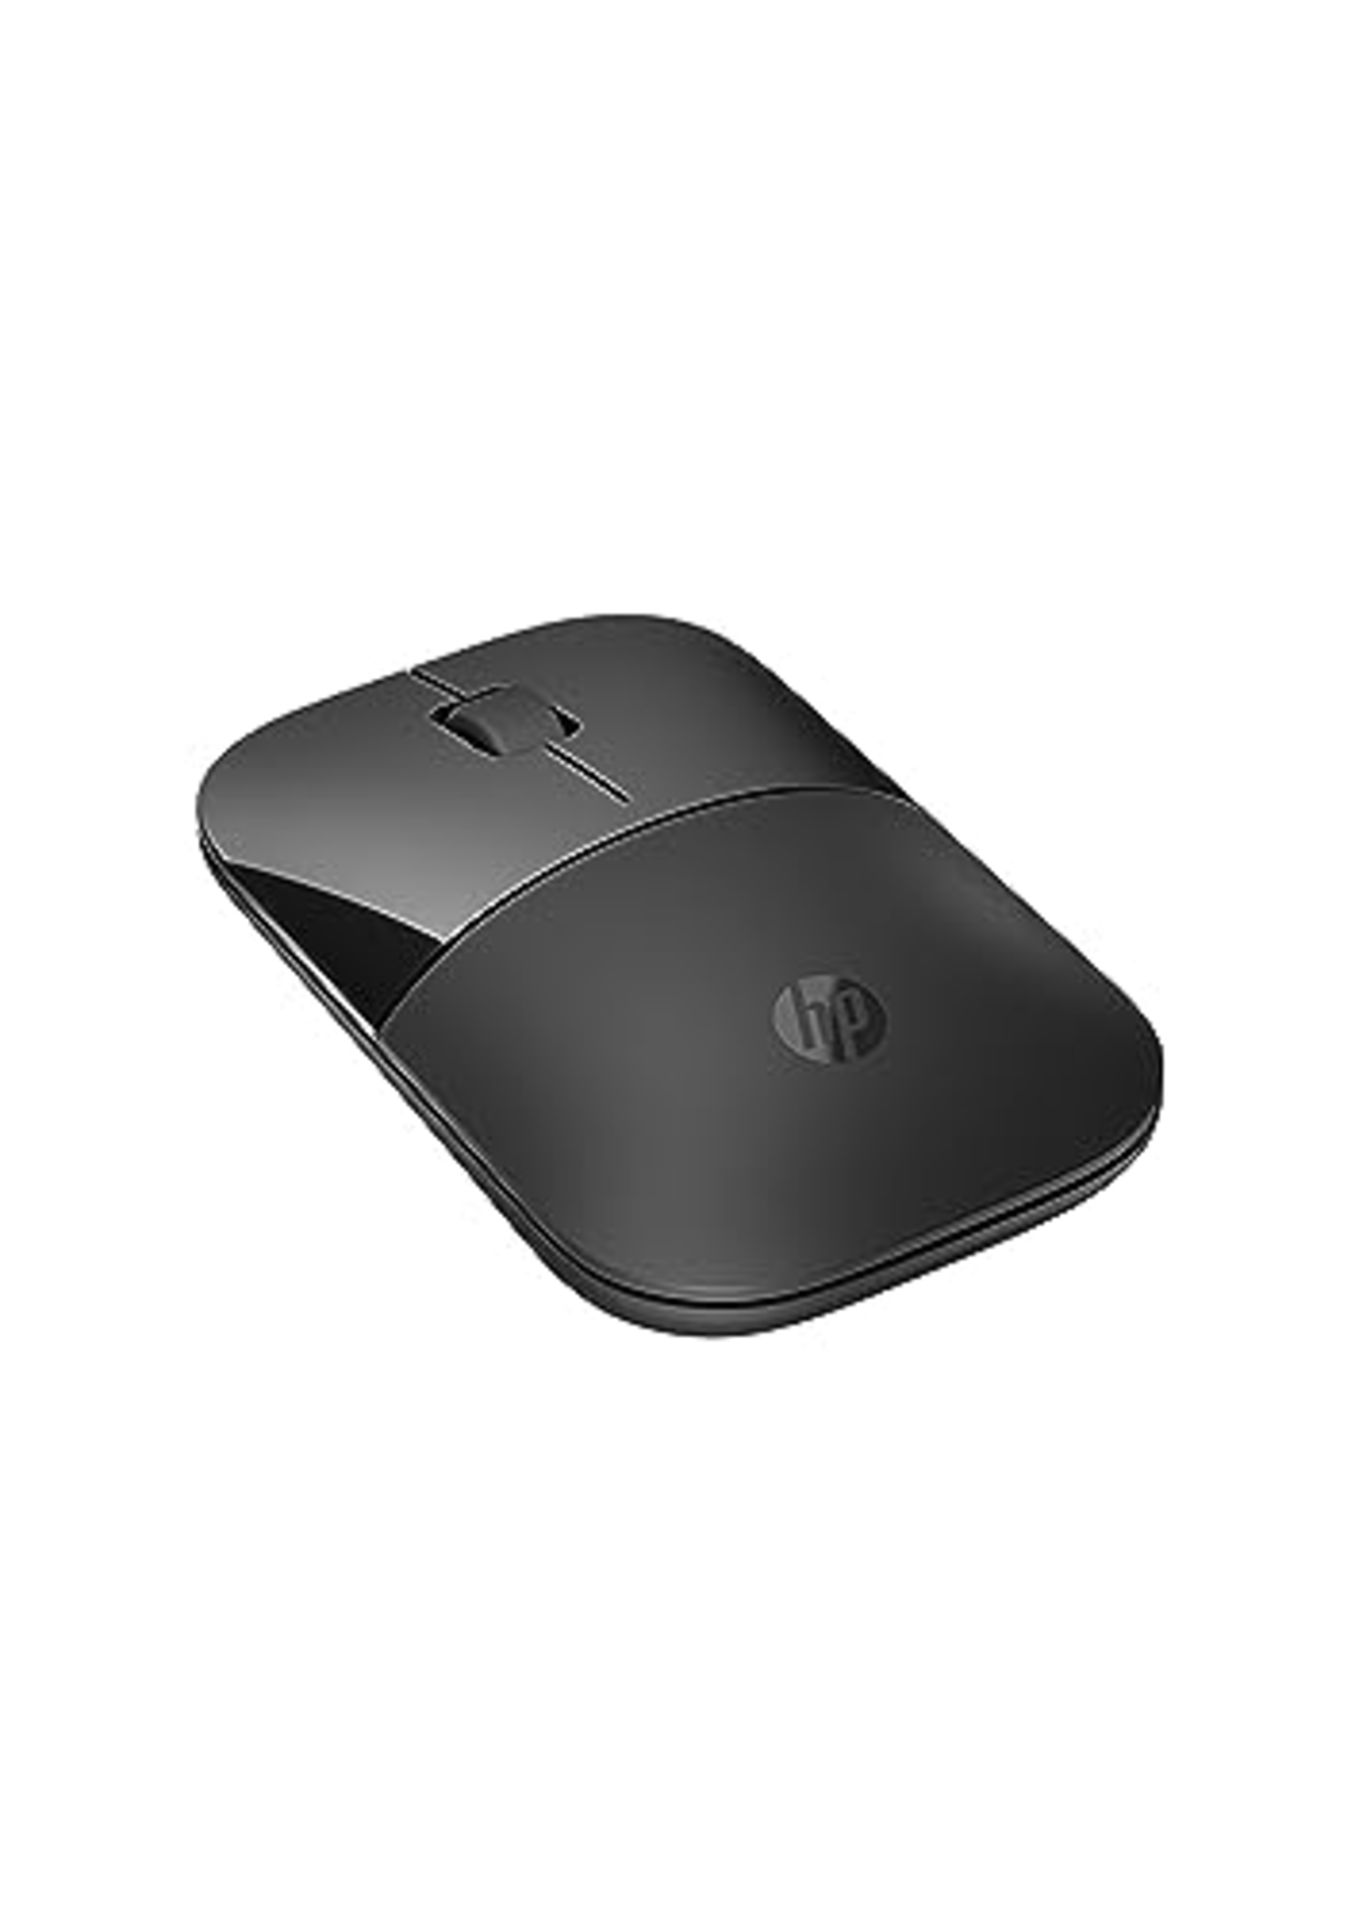 HP Z3700 wireless mouse | 1200 optical sensors | up to 16 months battery life | 2.4 GH